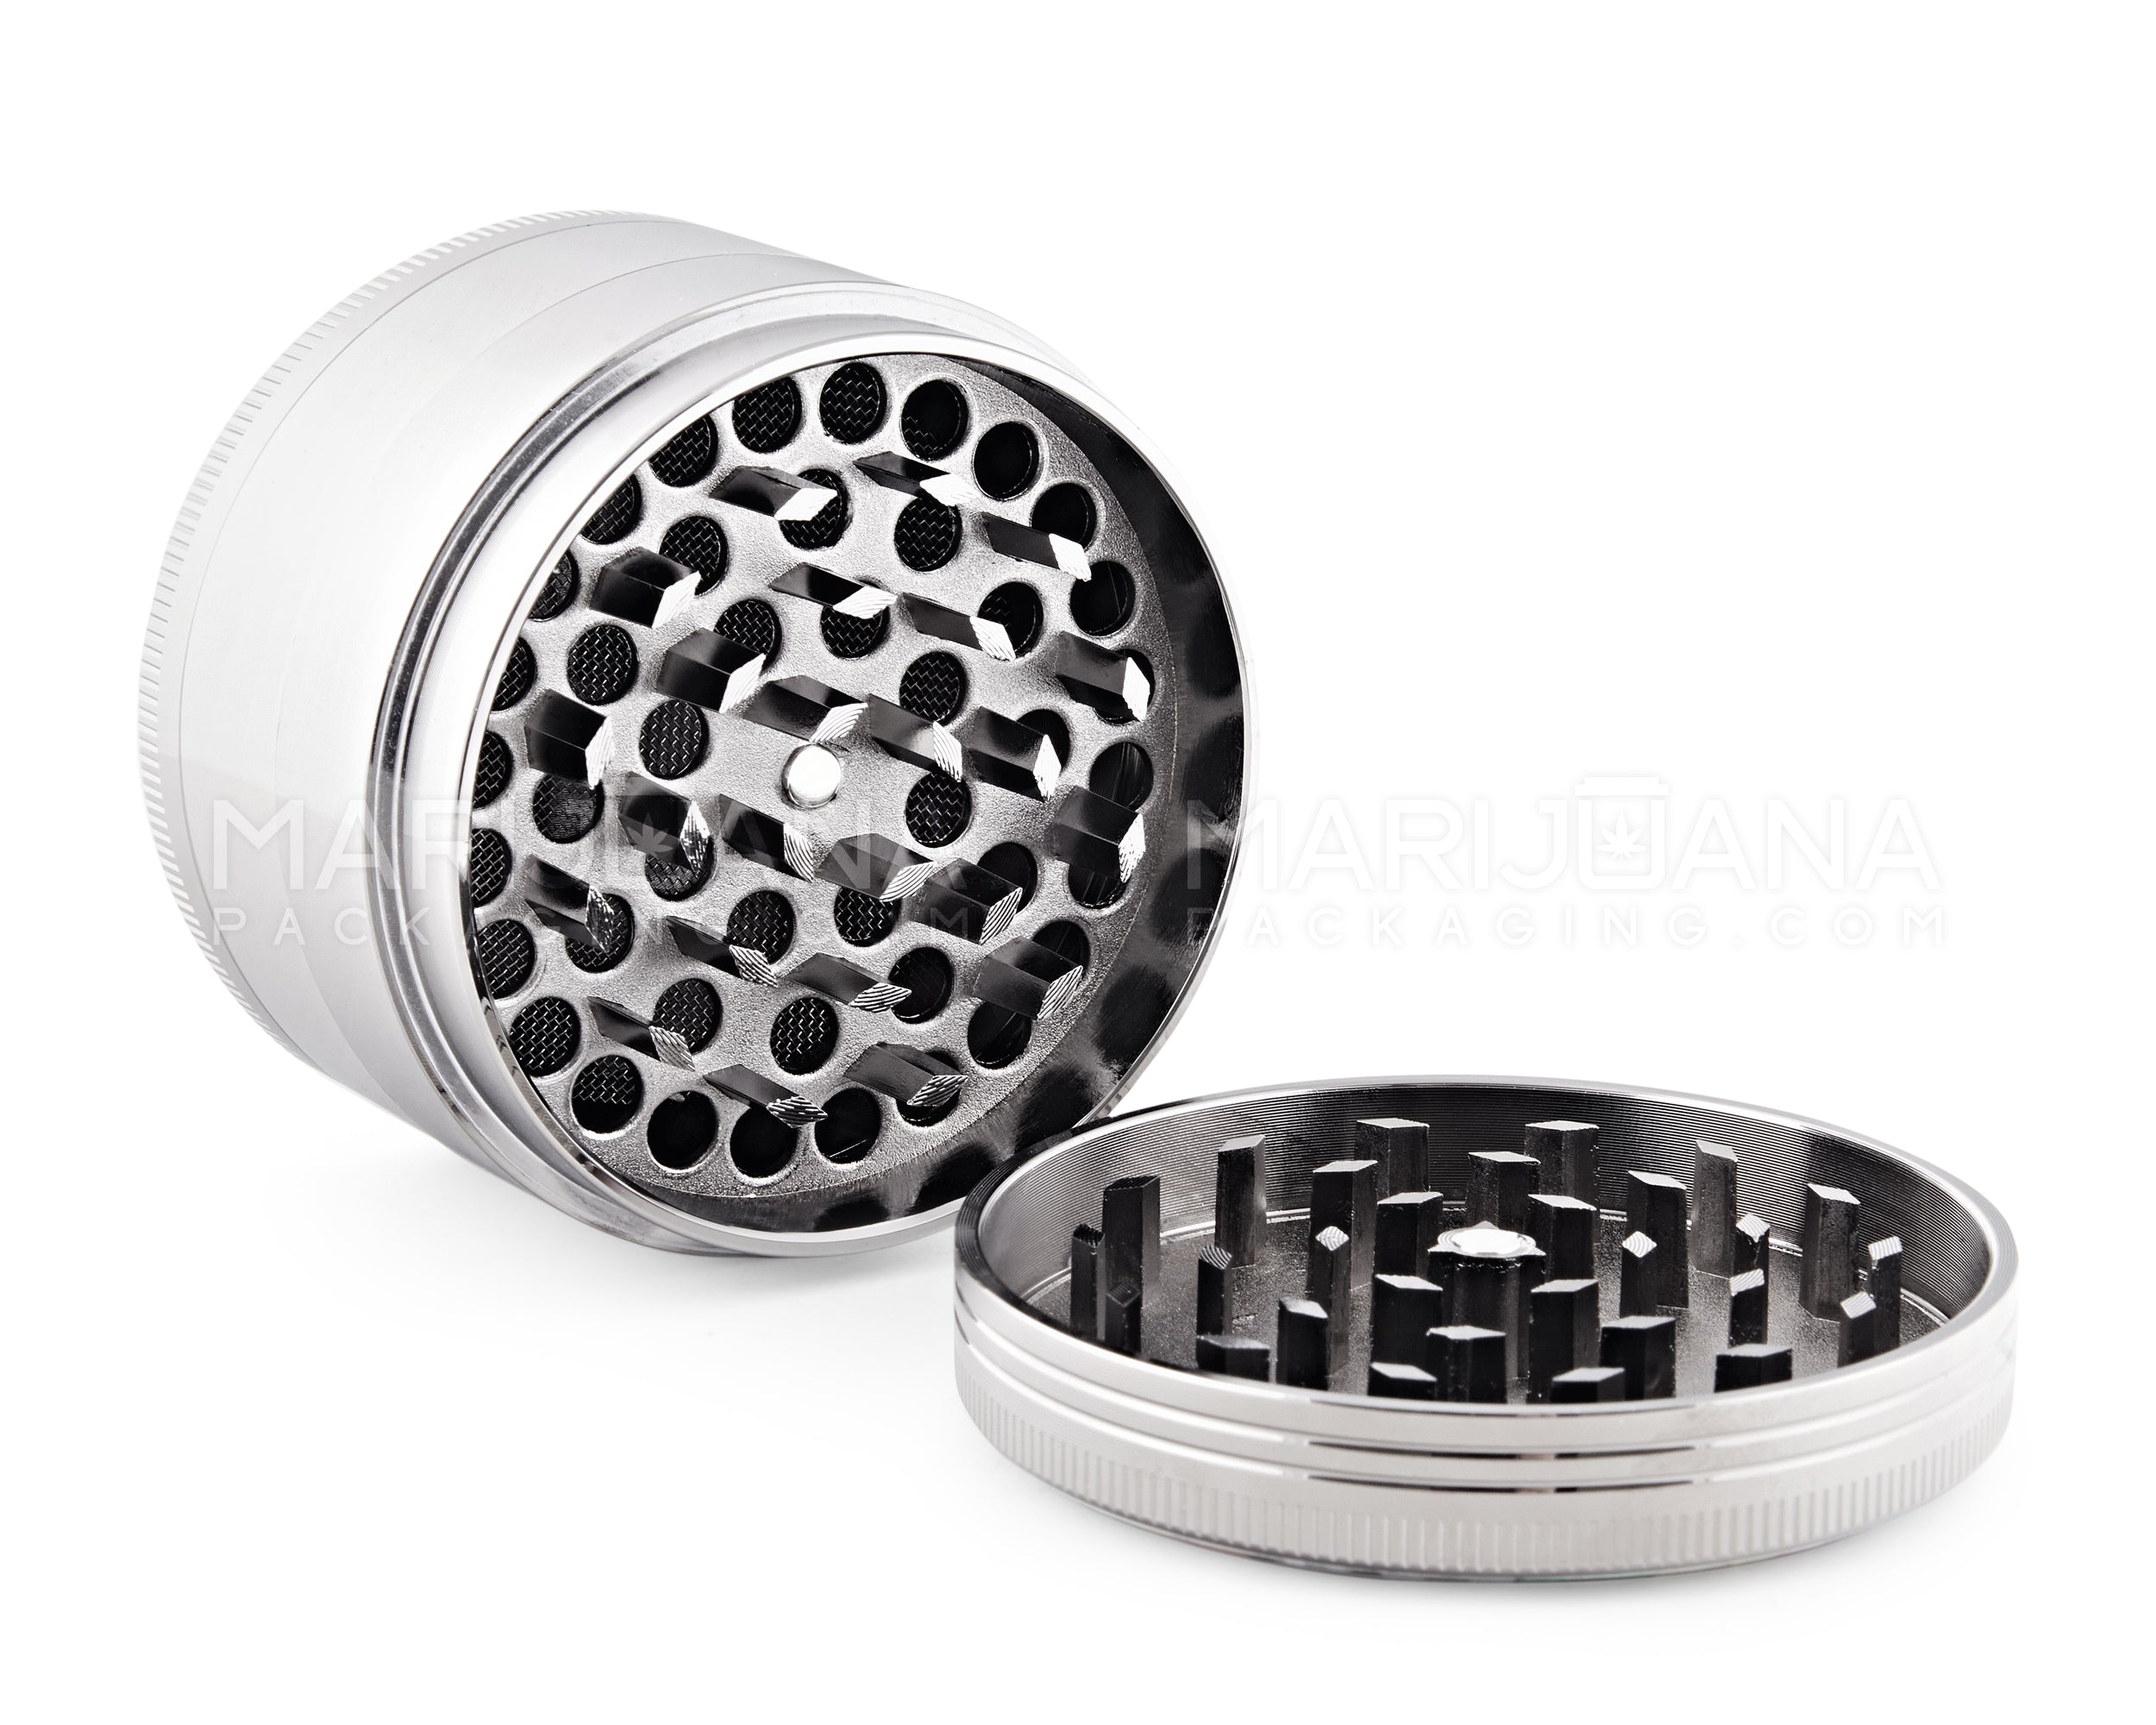 Pharmacy Magnetic Metal Grinder w/ Catcher | 4 Piece - 63mm - Silver